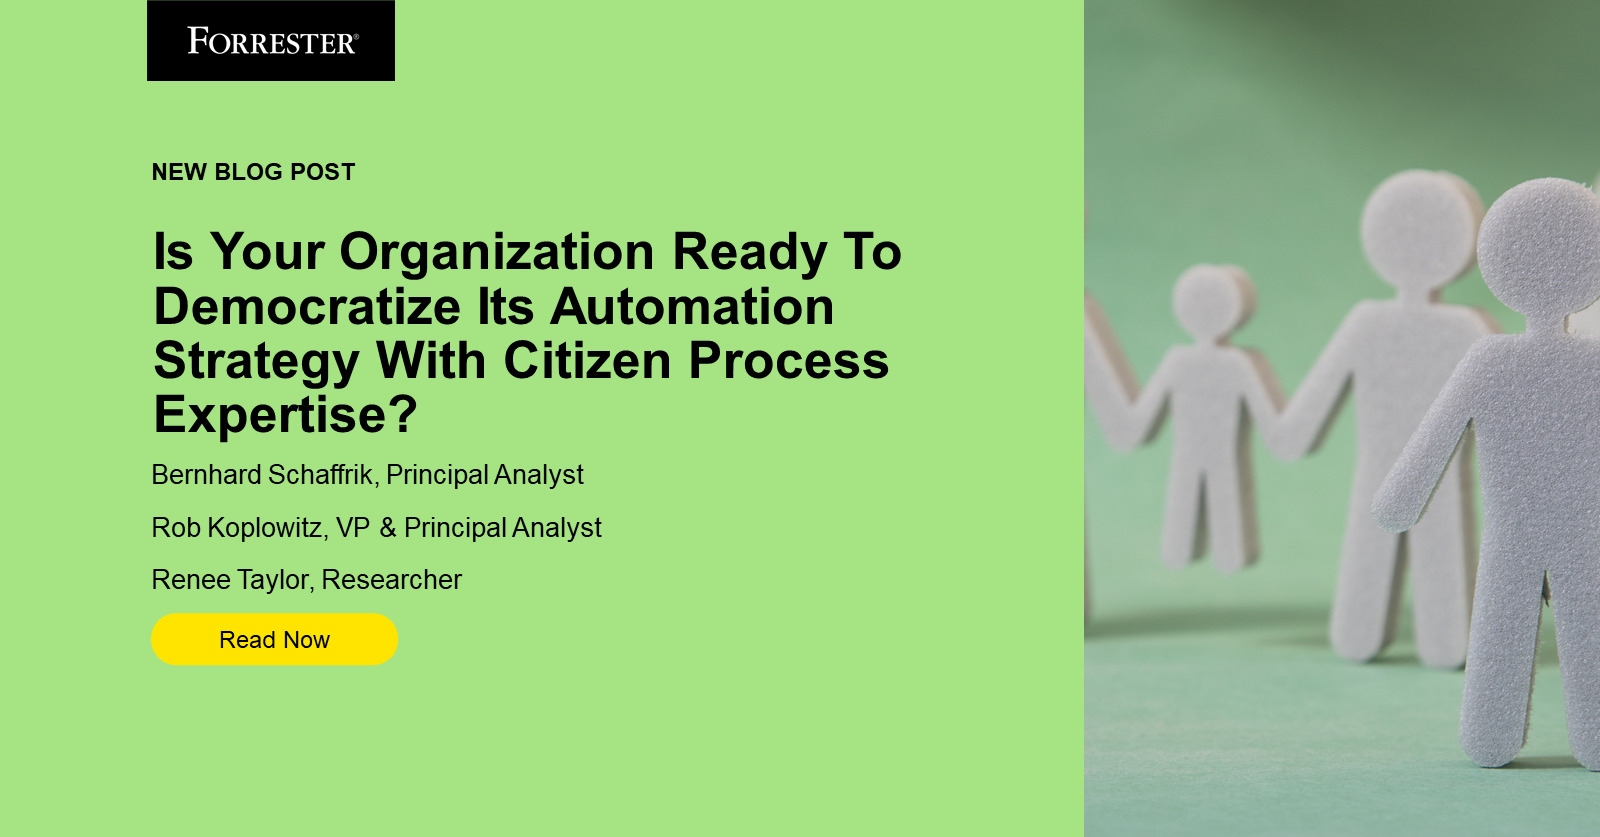 Are you ready for automation democratization?